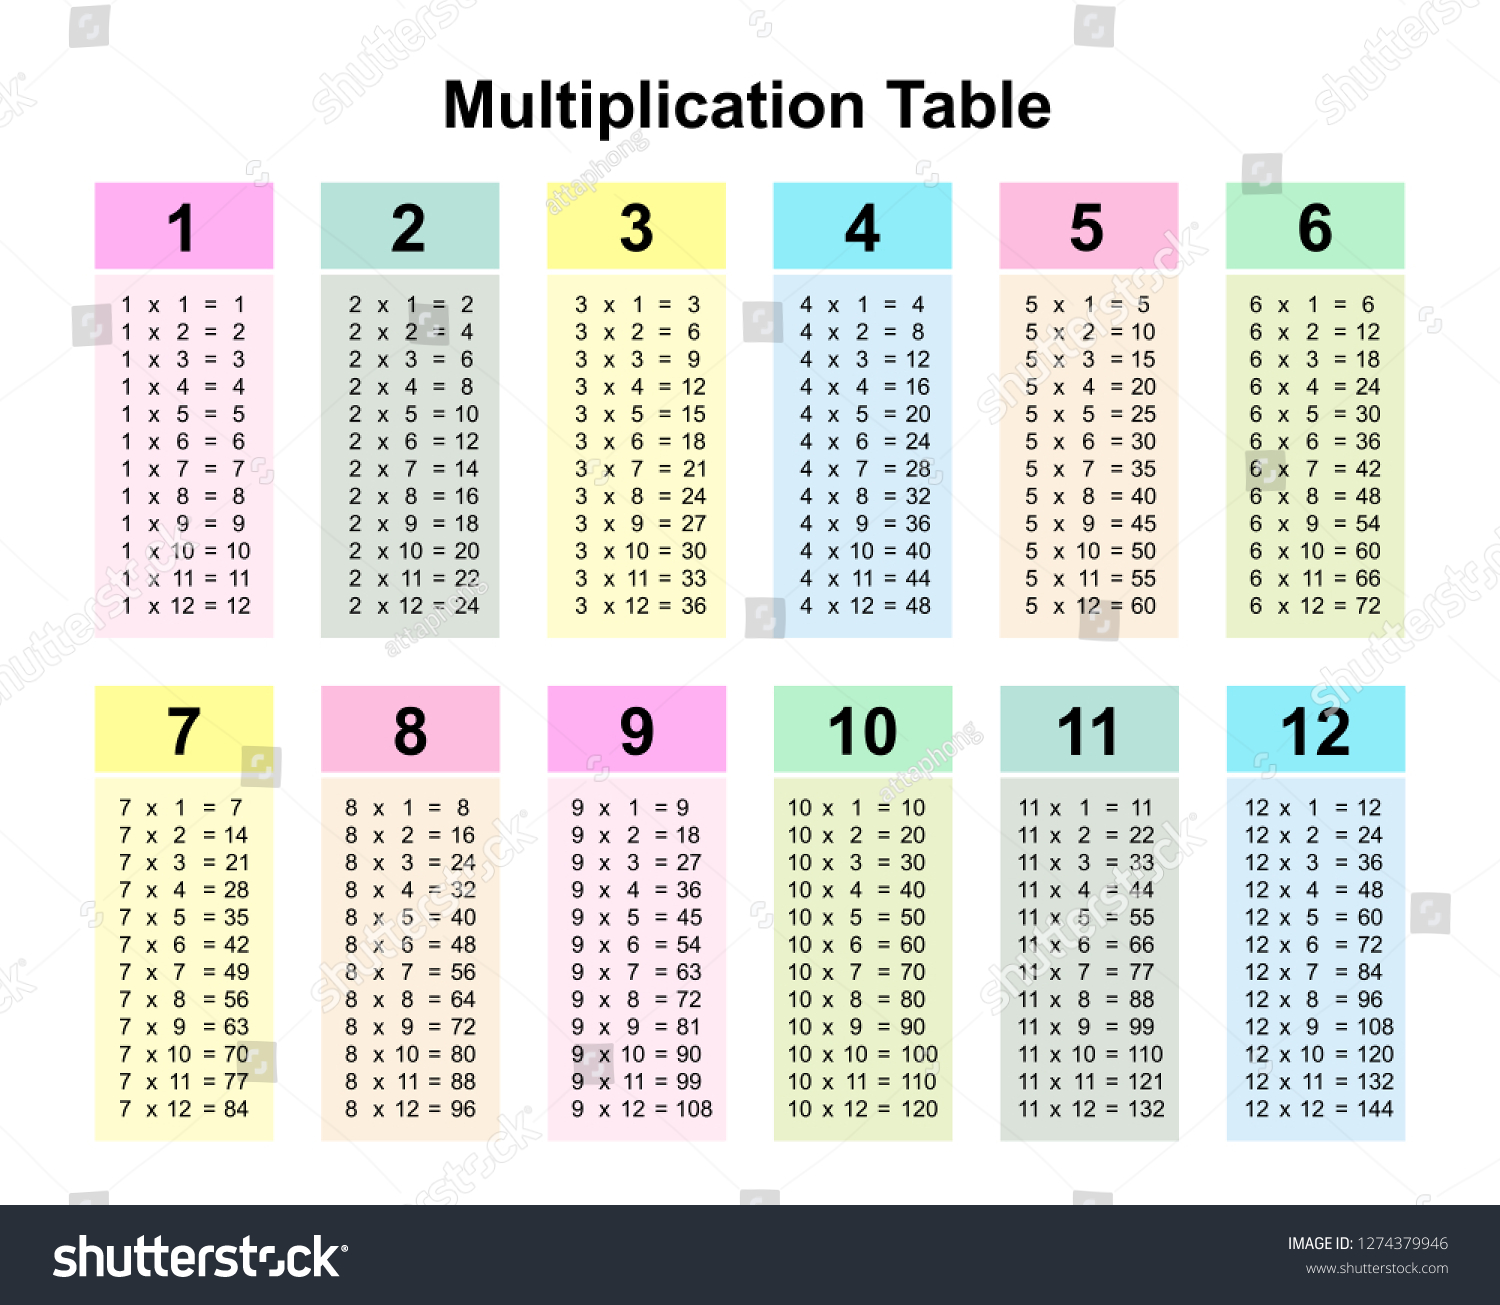 multiplication table chart multiplication table printable stock vector royalty free 1274379946 shutterstock